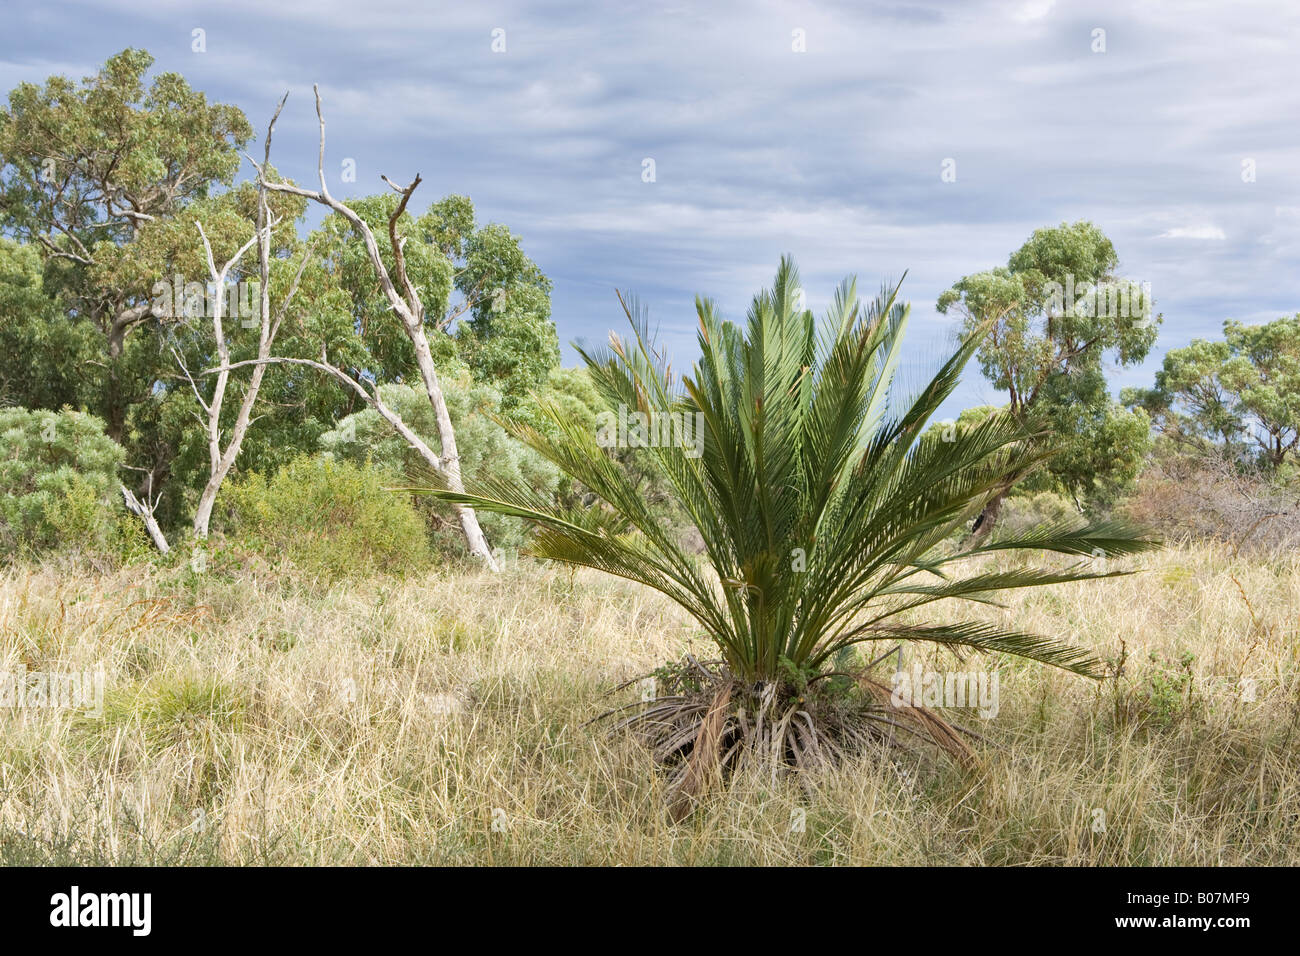 Macrozamia fraseri (A Cycad plant of the Zamiaceae family) growing in native bushland in Bold Park, Perth, Western Australia. Stock Photo